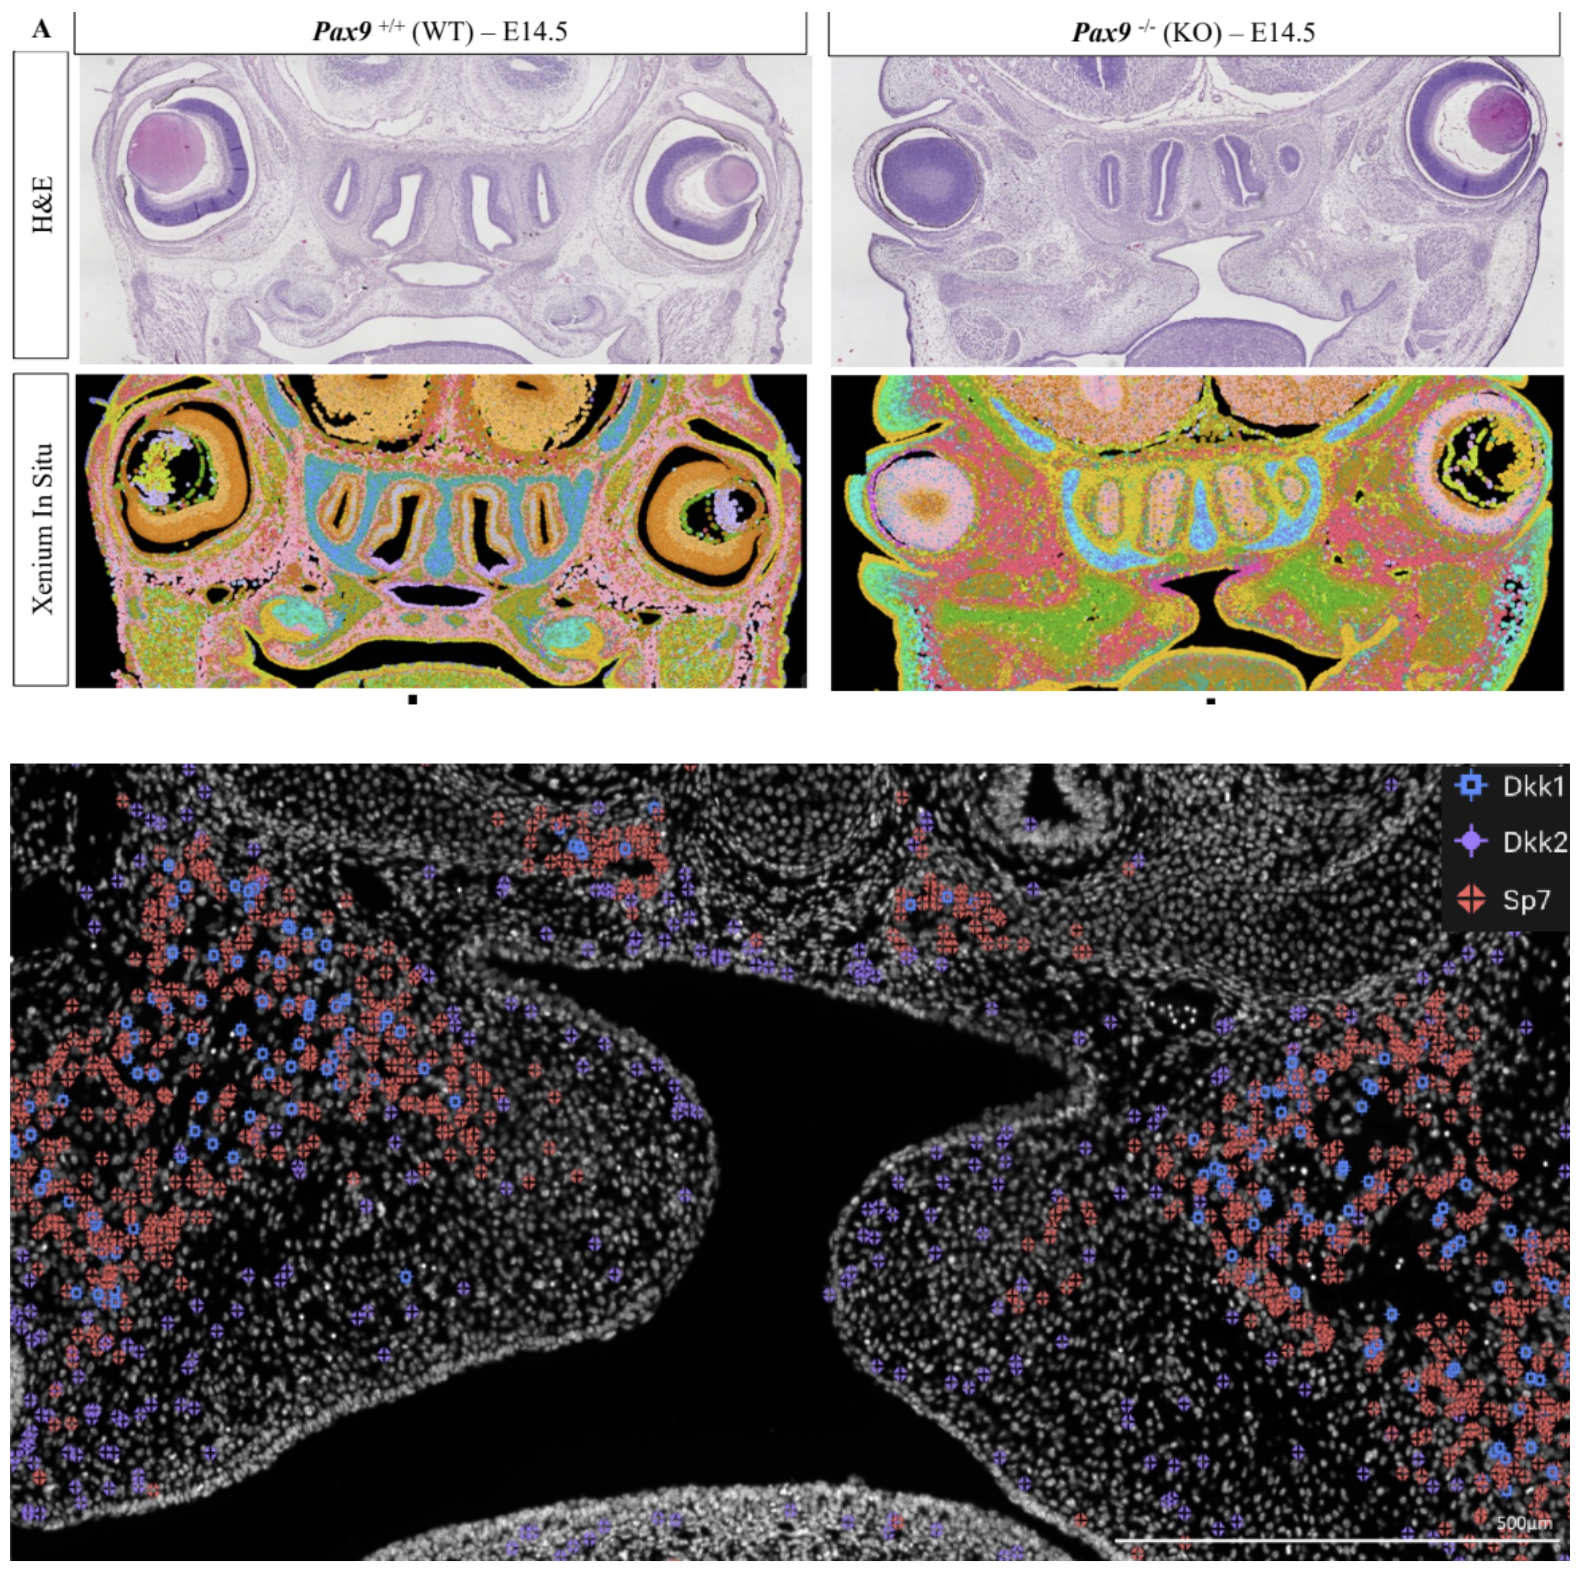 Figure 8. Using Xenium to transcriptomically and morphologically characterize palate in WT and Pax9-/- mice. (A) Coronal whole-head sections of embryonic WT and Pax9-/- mice processed with Xenium-based cell clusters (second row) and stained with H&E post-Xenium (first row). Spatial location of the Wnt modulators Dkk1 and Dkk2 (third row), showing distinct patterns of expression, as well as Sp7 (a palatine bone border marker). Image adapted from Figures 3 and 4 from Piña et al. 2023. (CC BY 4.0).